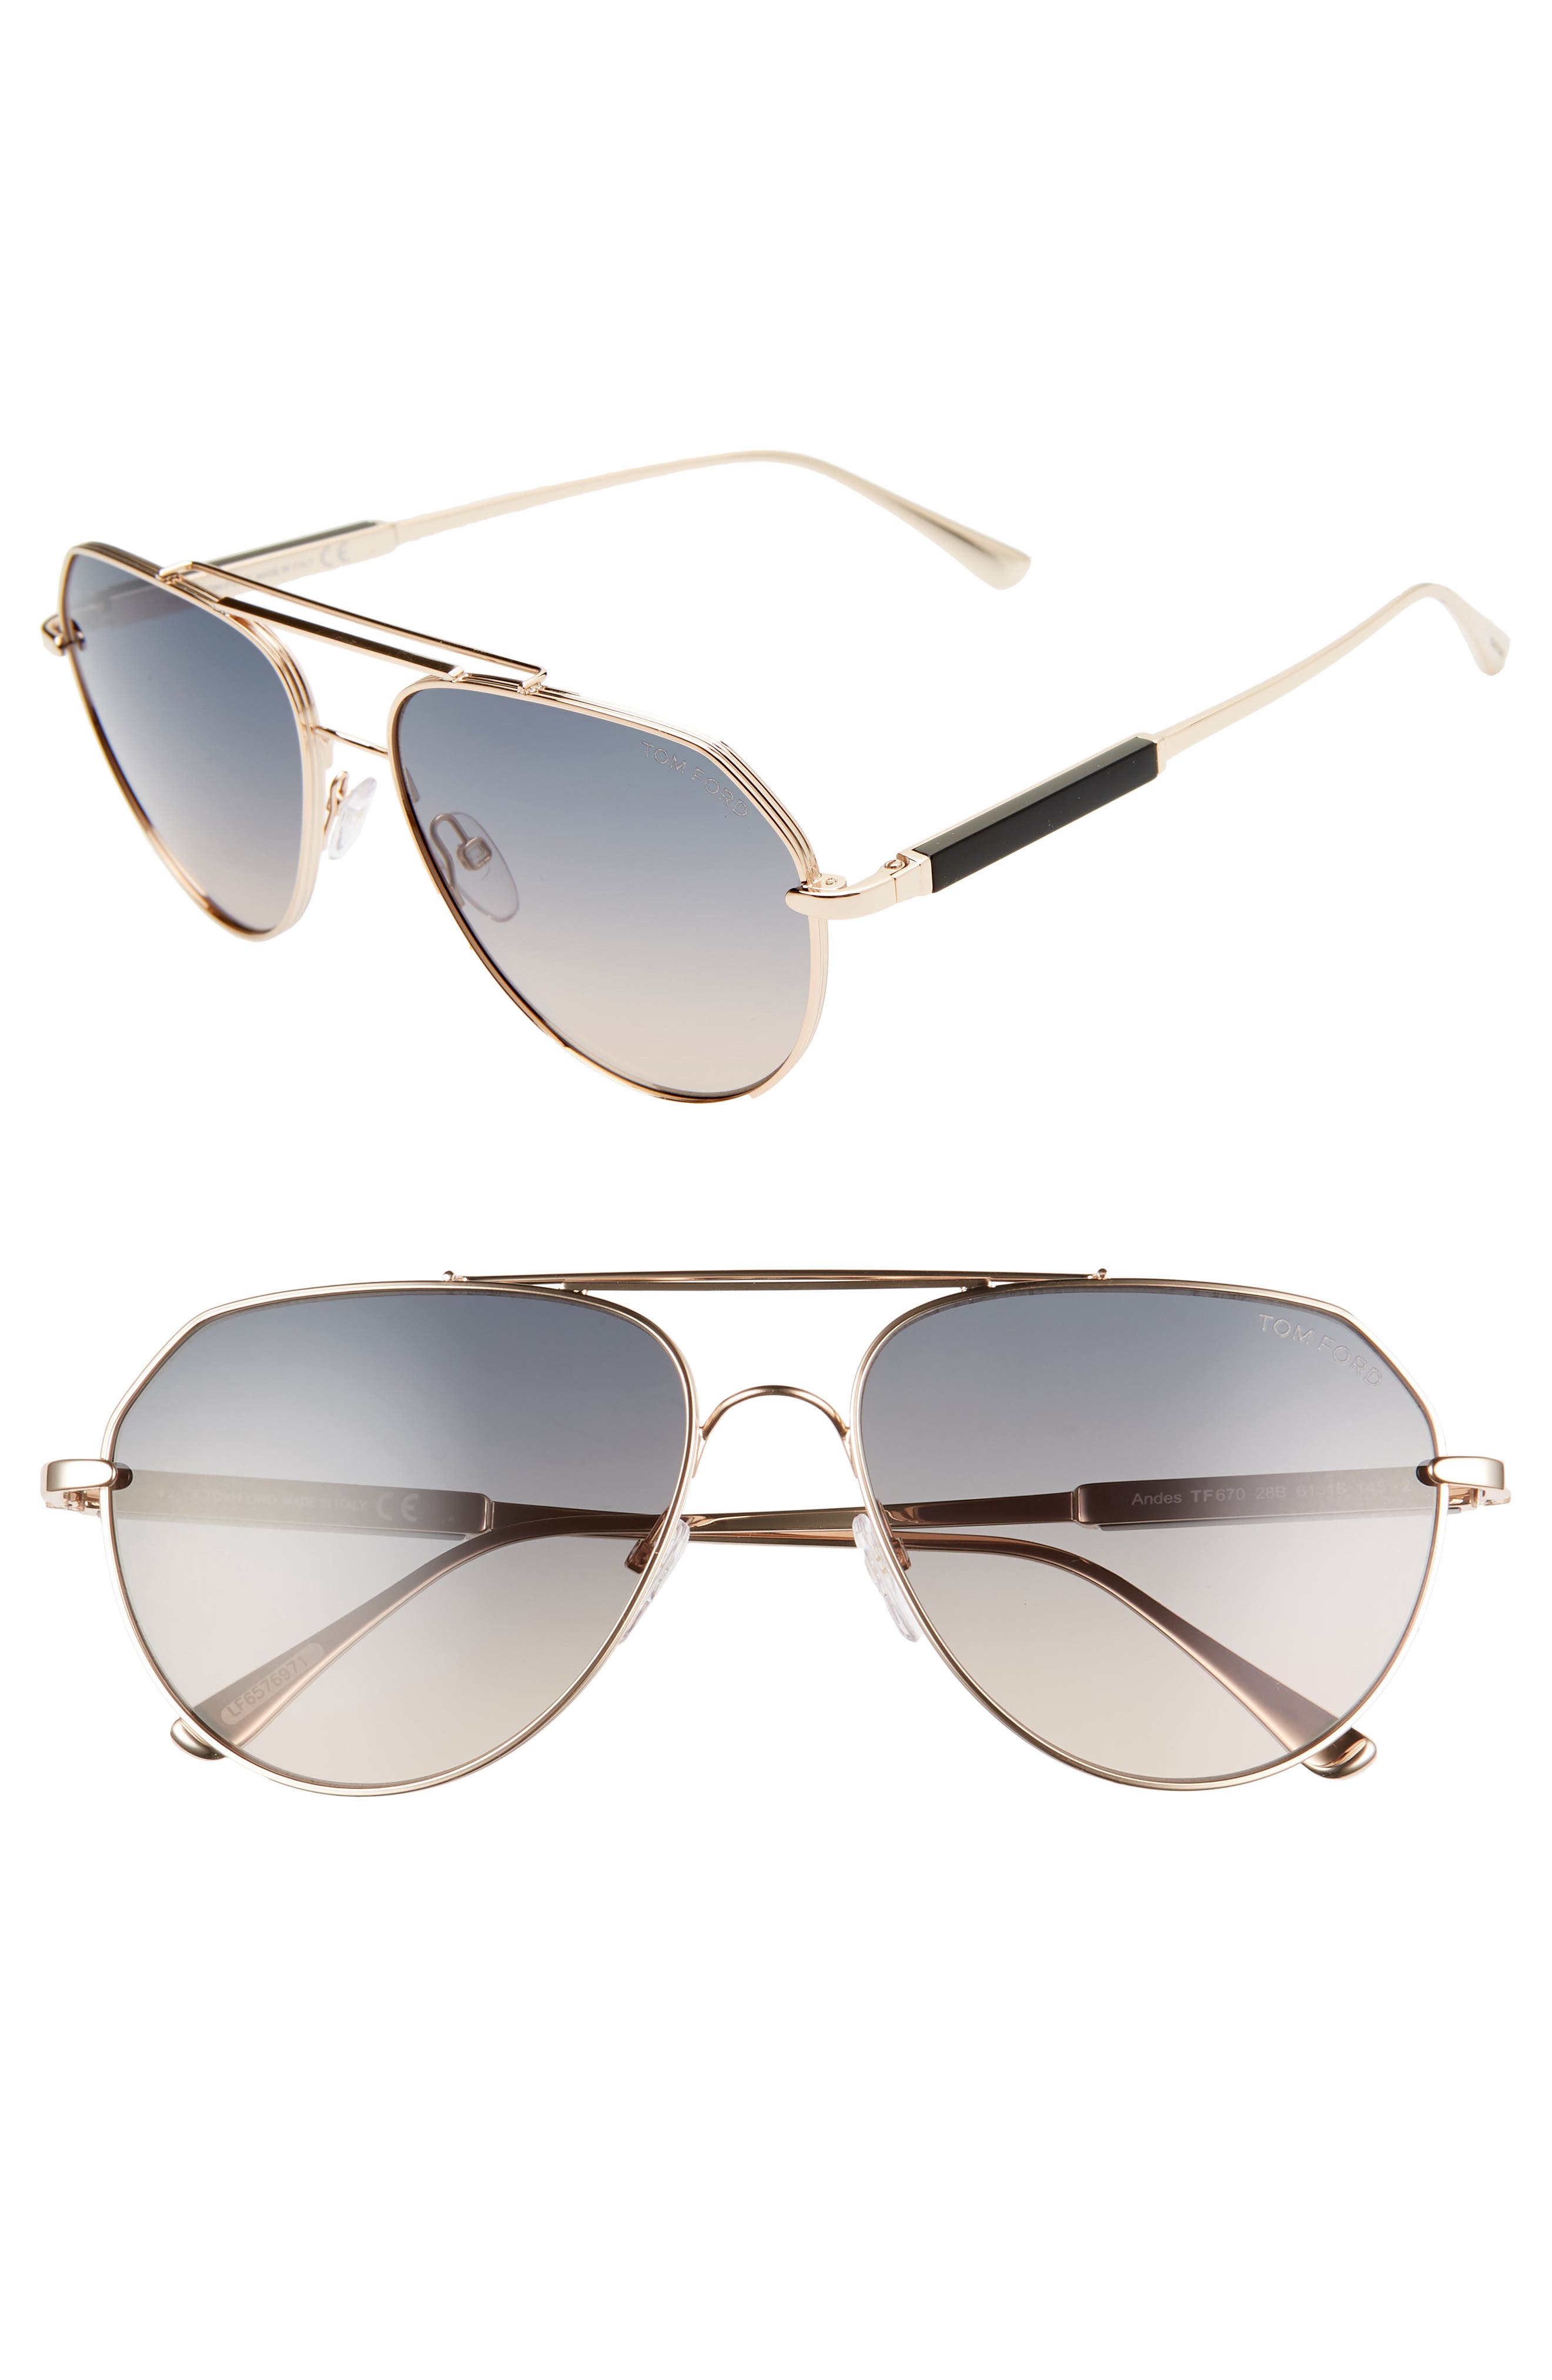 Tom Ford Andes TF670 Sunglasses